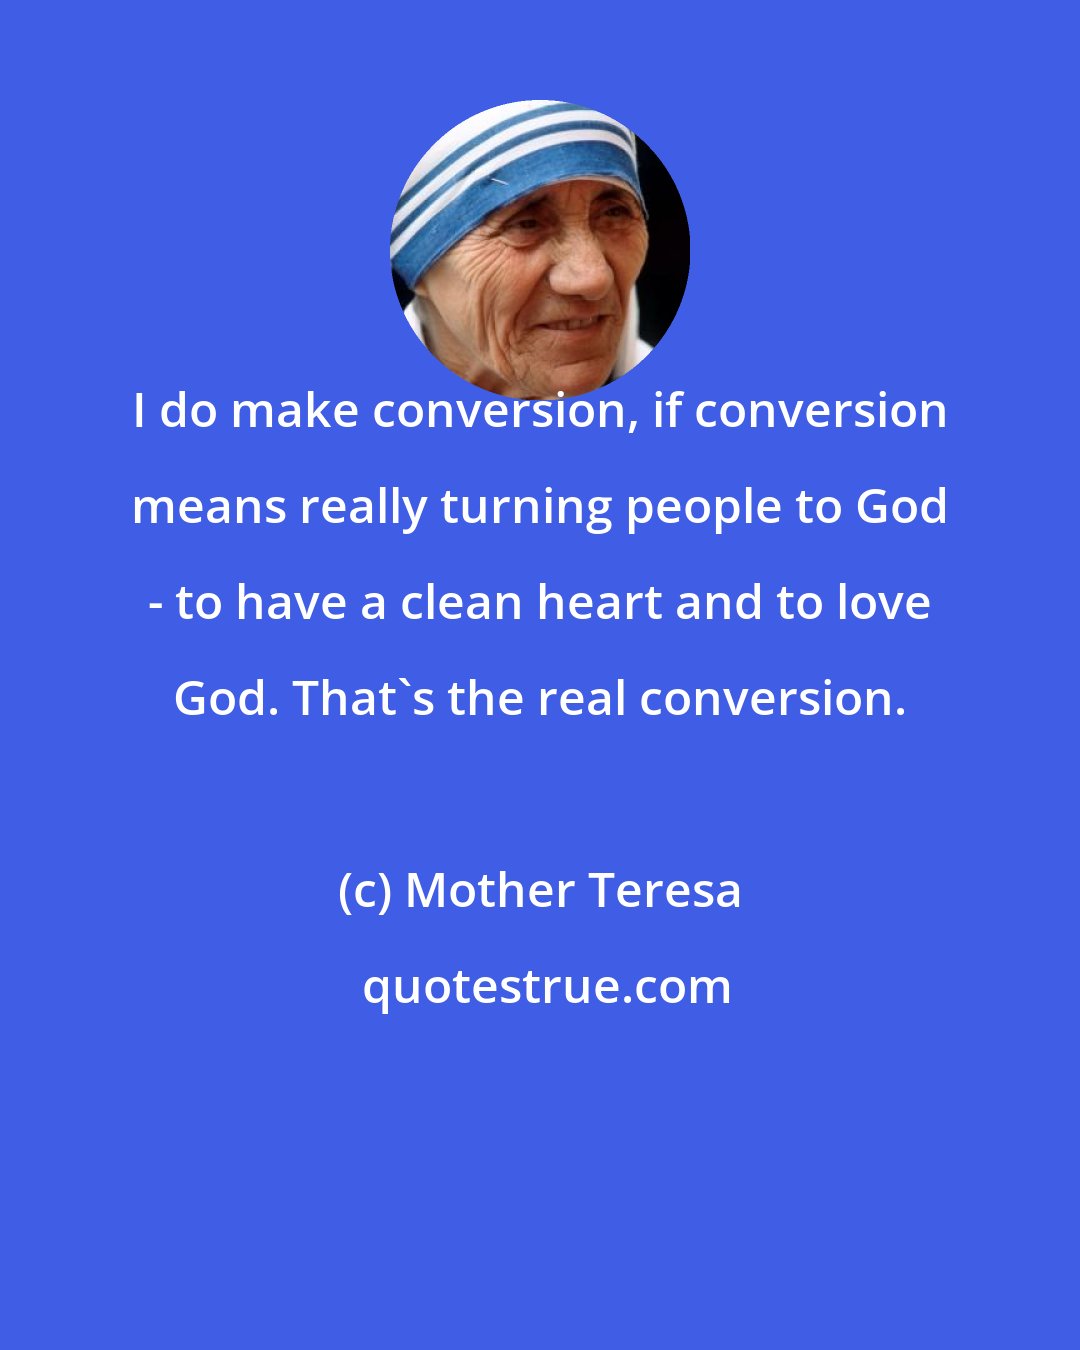 Mother Teresa: I do make conversion, if conversion means really turning people to God - to have a clean heart and to love God. That's the real conversion.